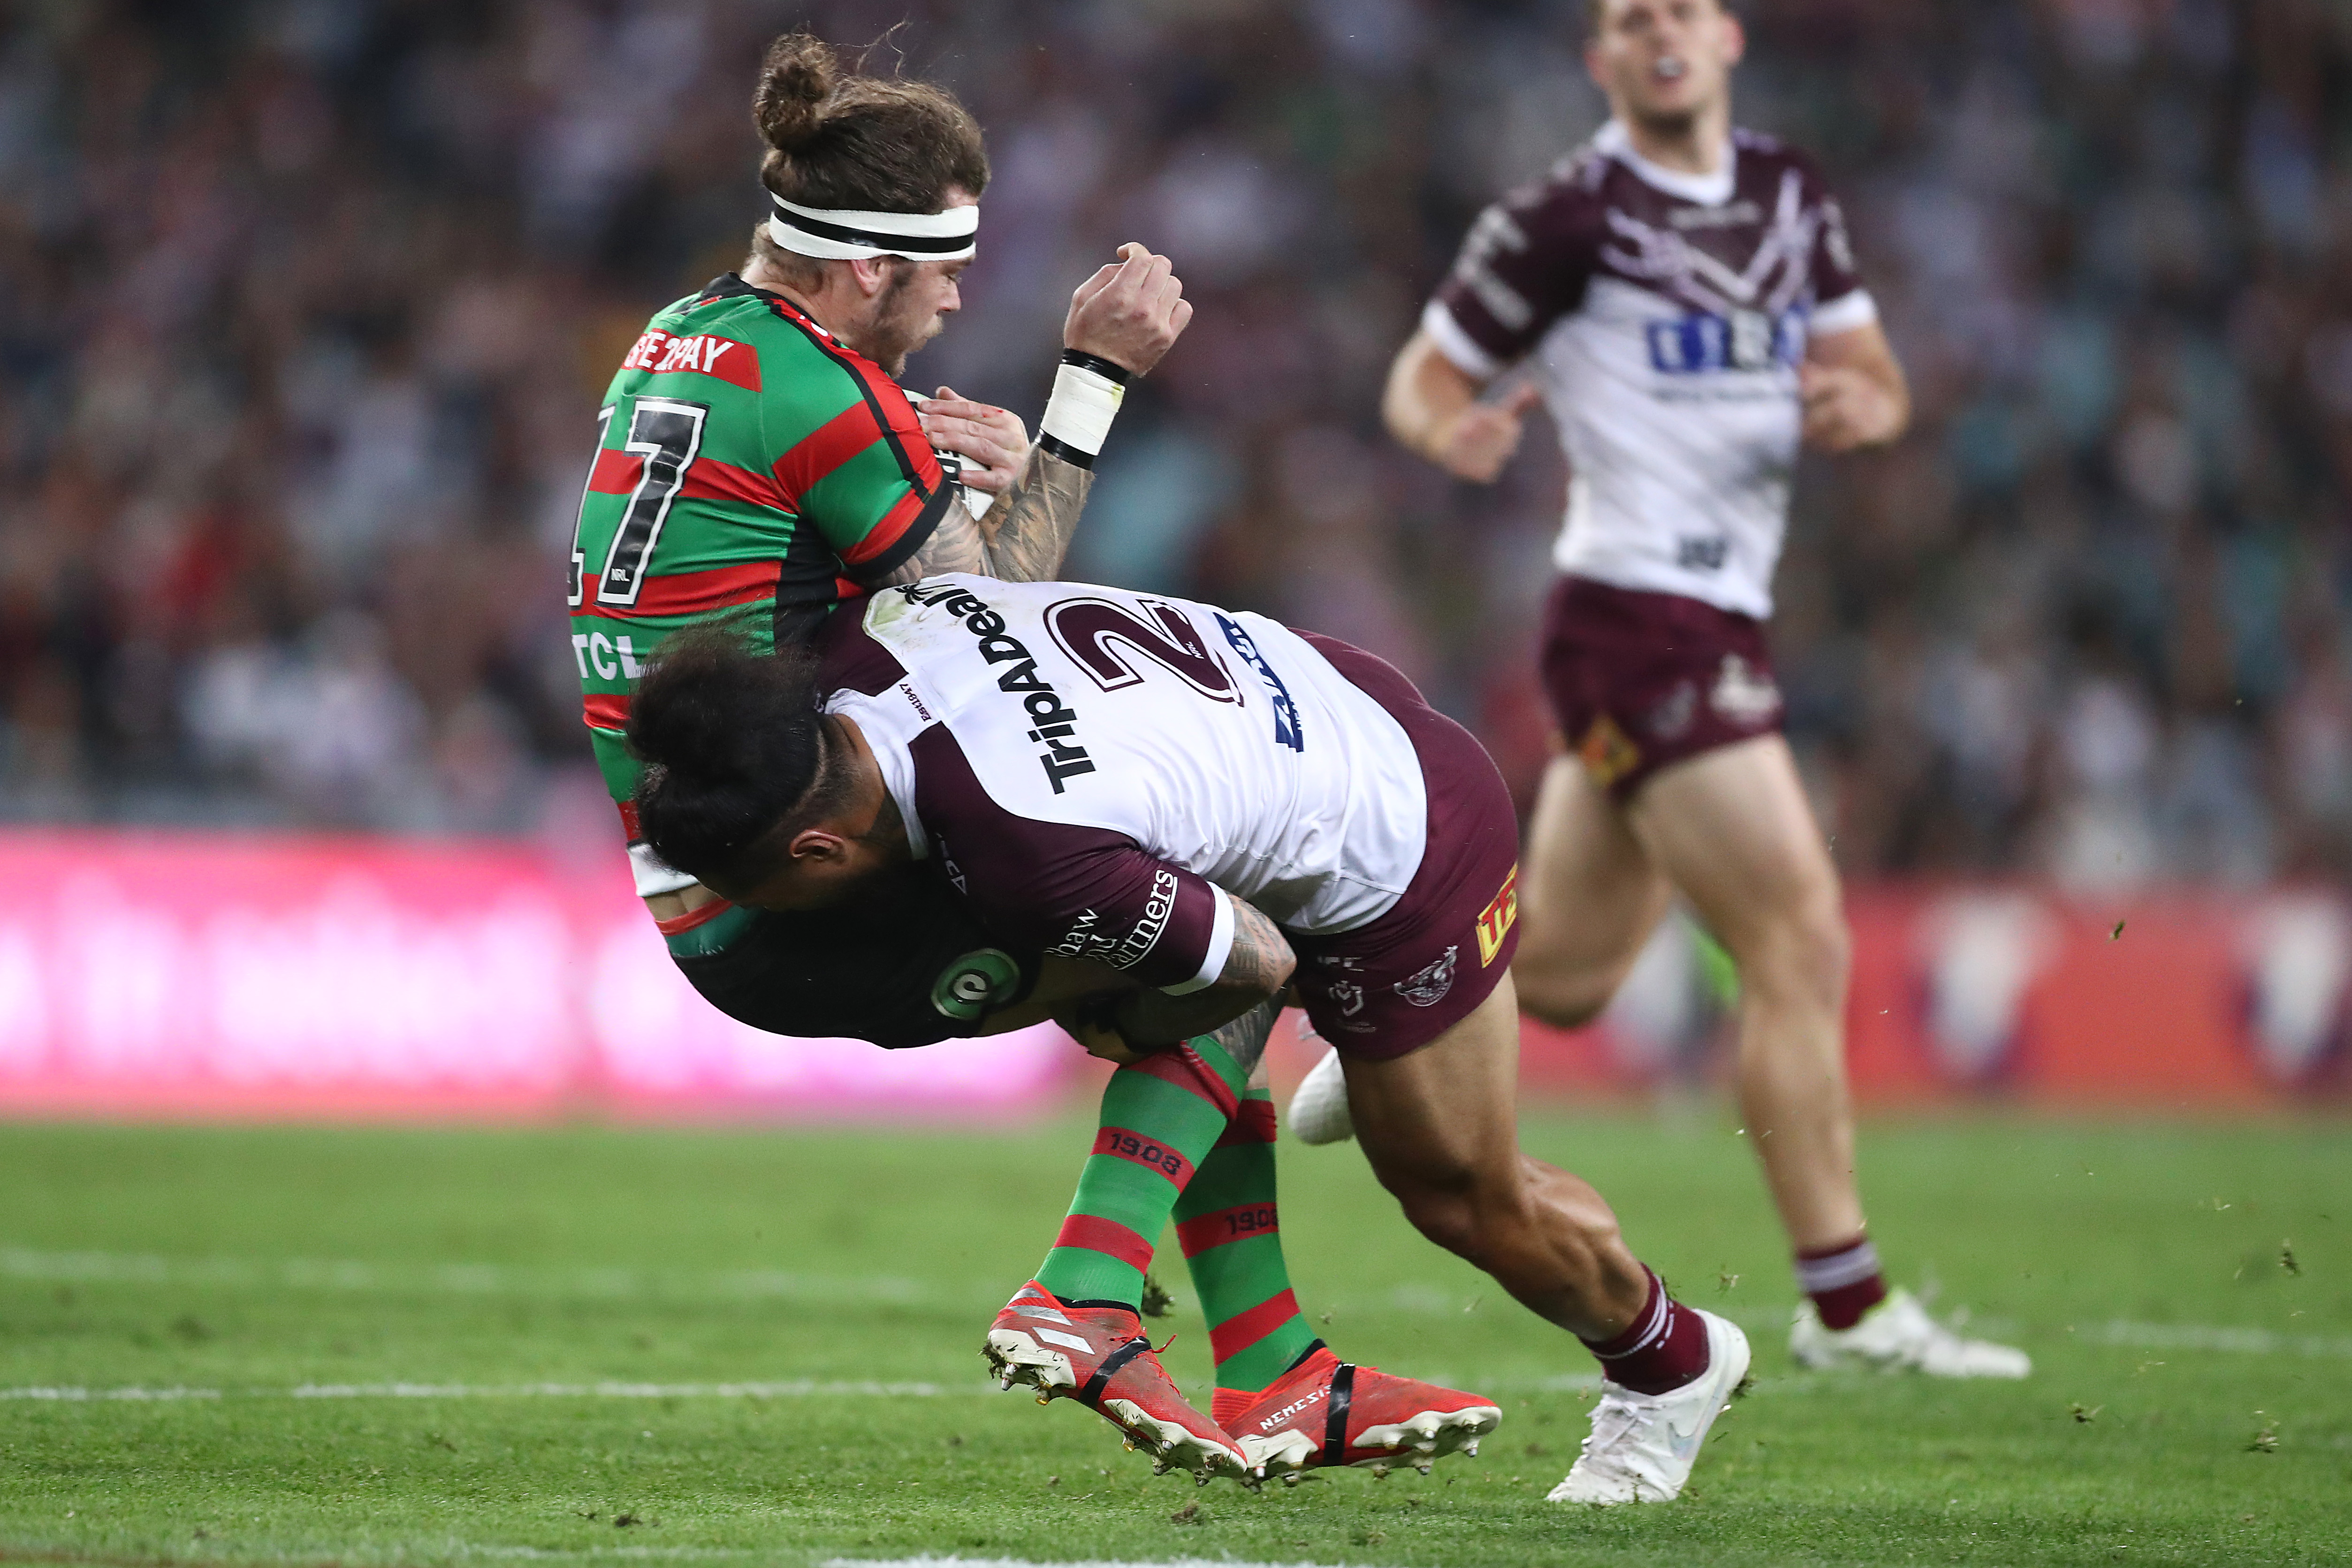 NRL team lists: Every side's confirmed lineup for Round 12